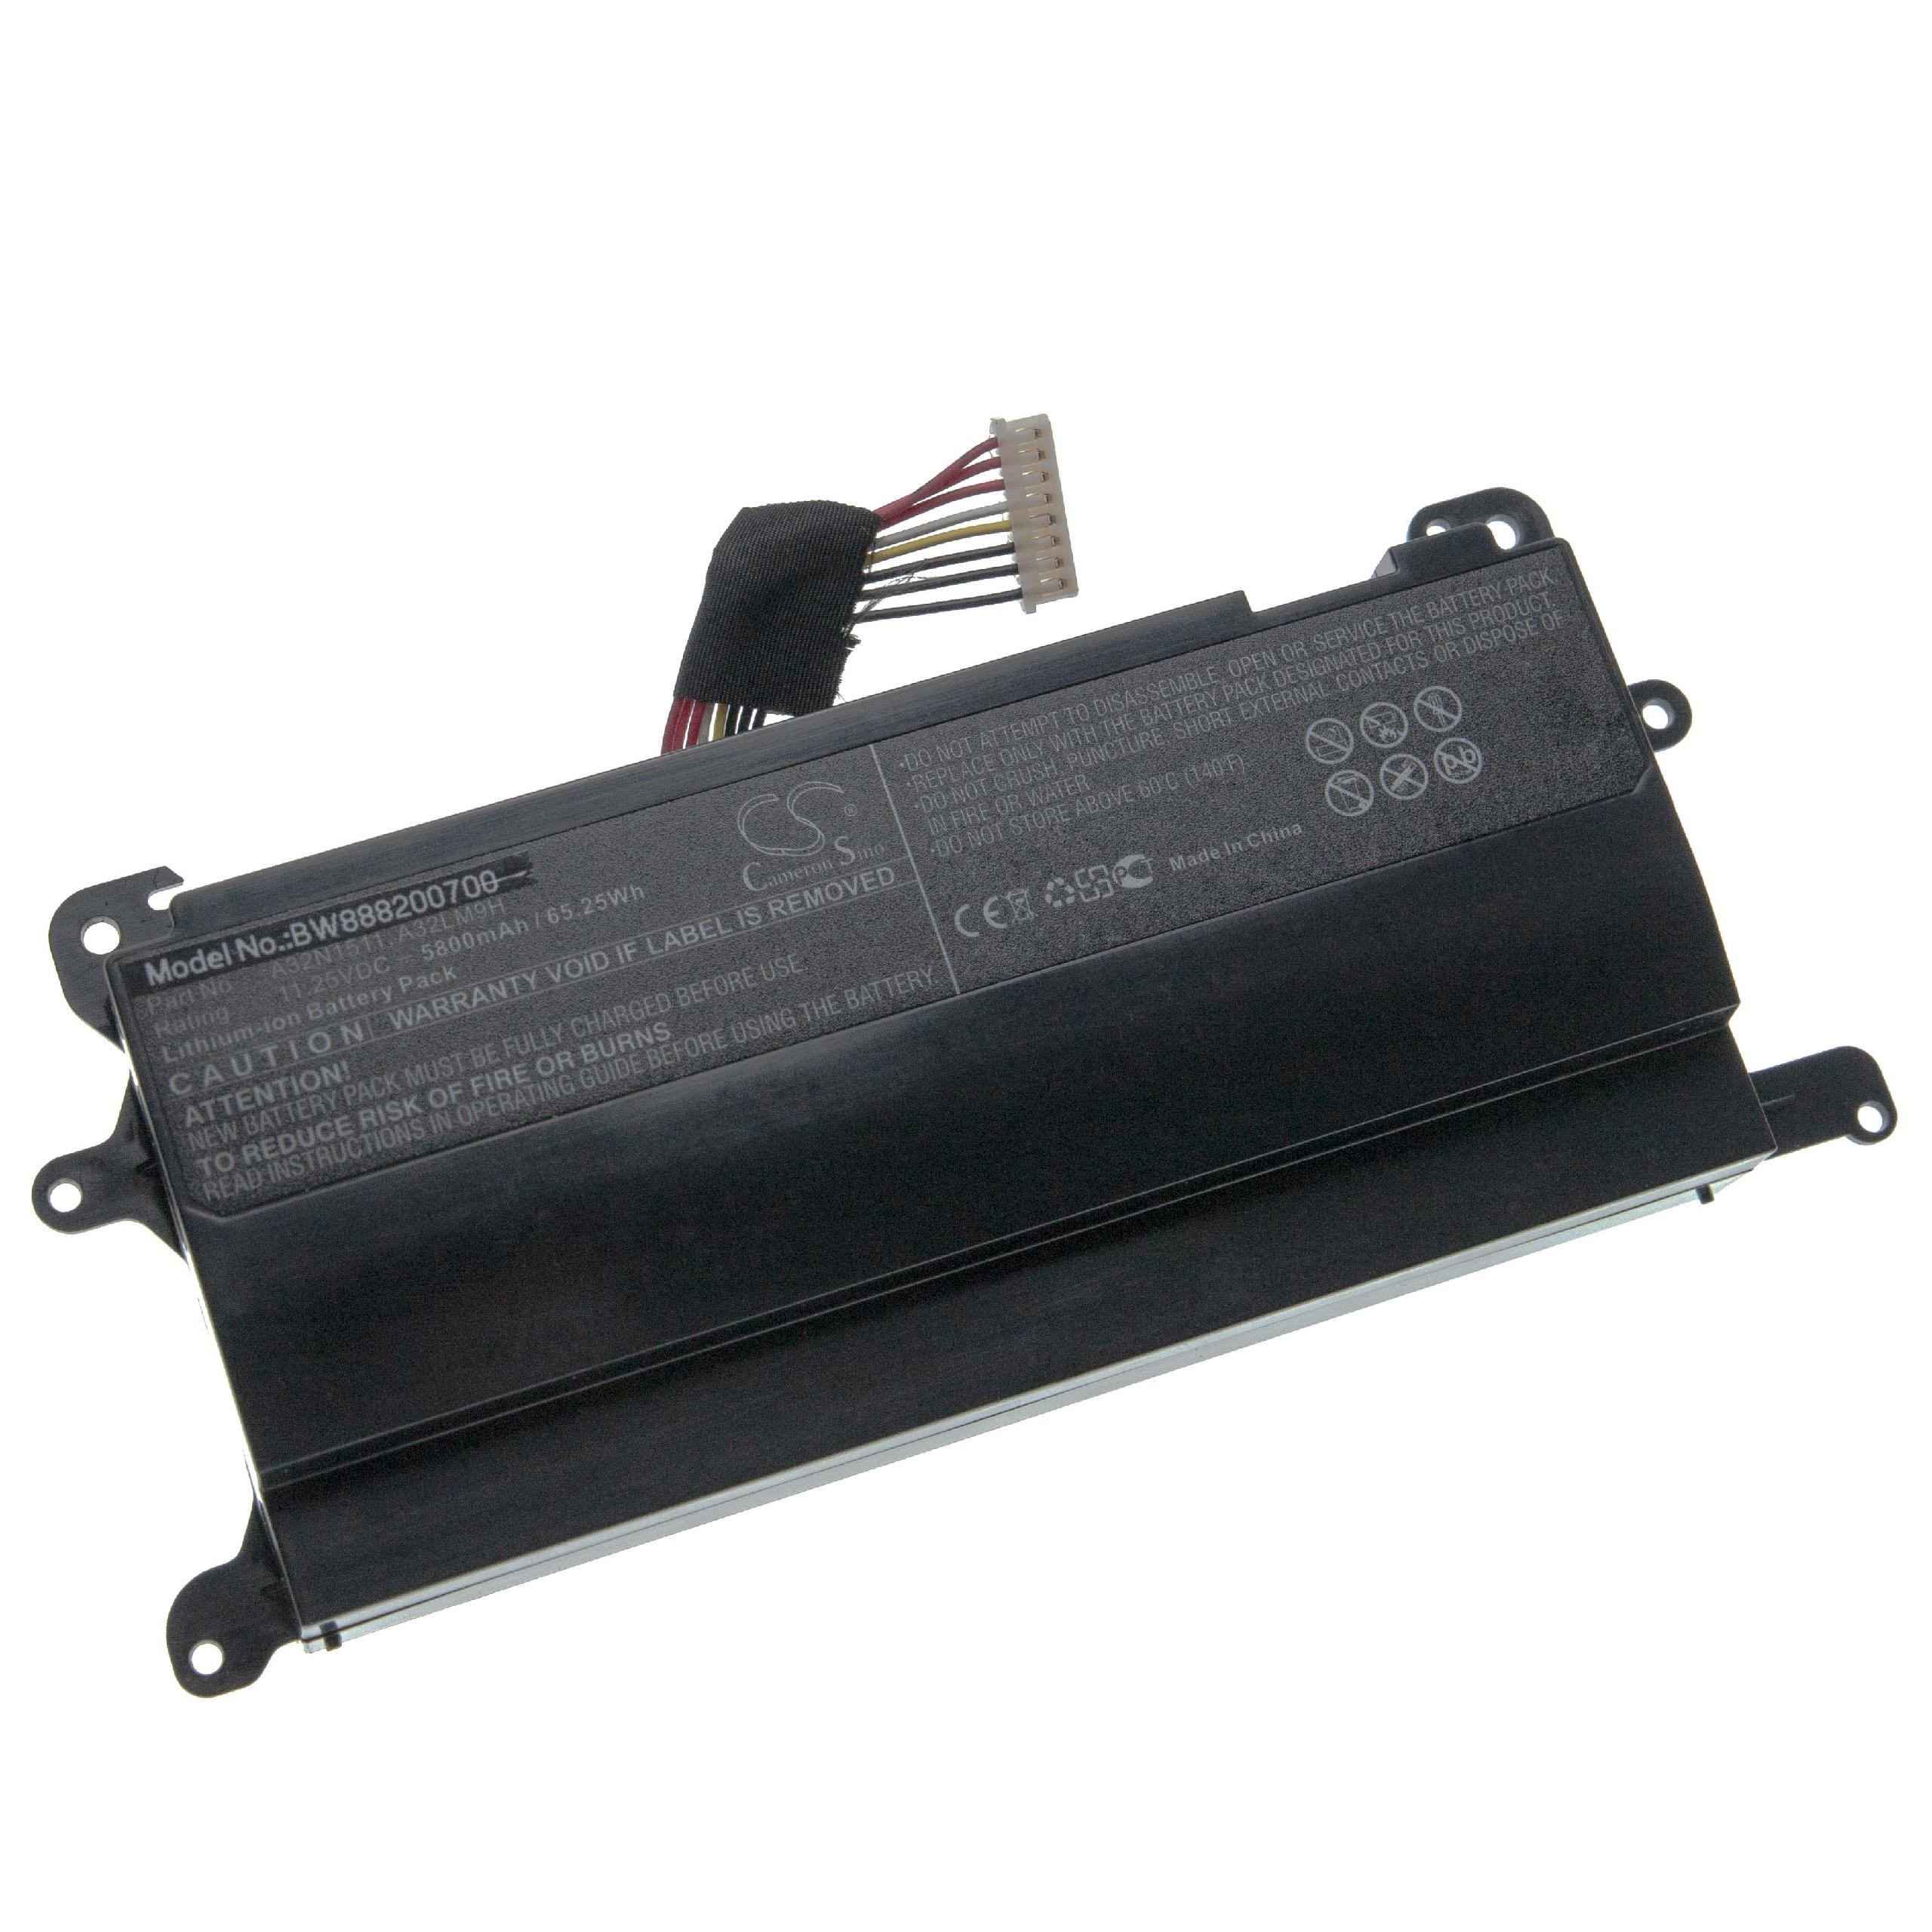 Notebook Battery Replacement for Asus A32LM9H, 0B110-00370000, A32N1511 - 5800mAh 11.25V Li-Ion, black